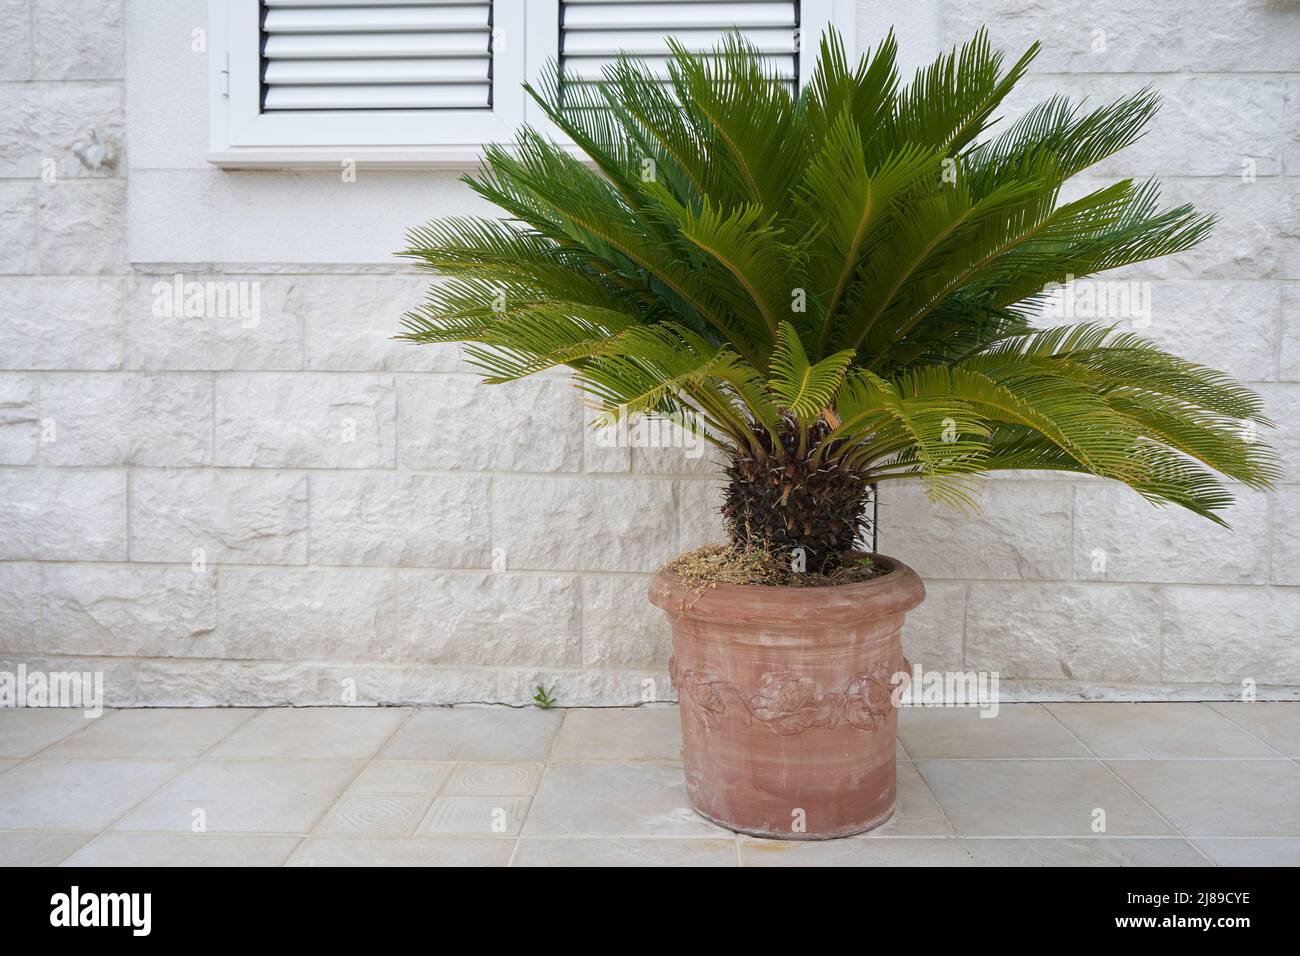 Cycas palm tree in large pots outside the building. Stock Photo